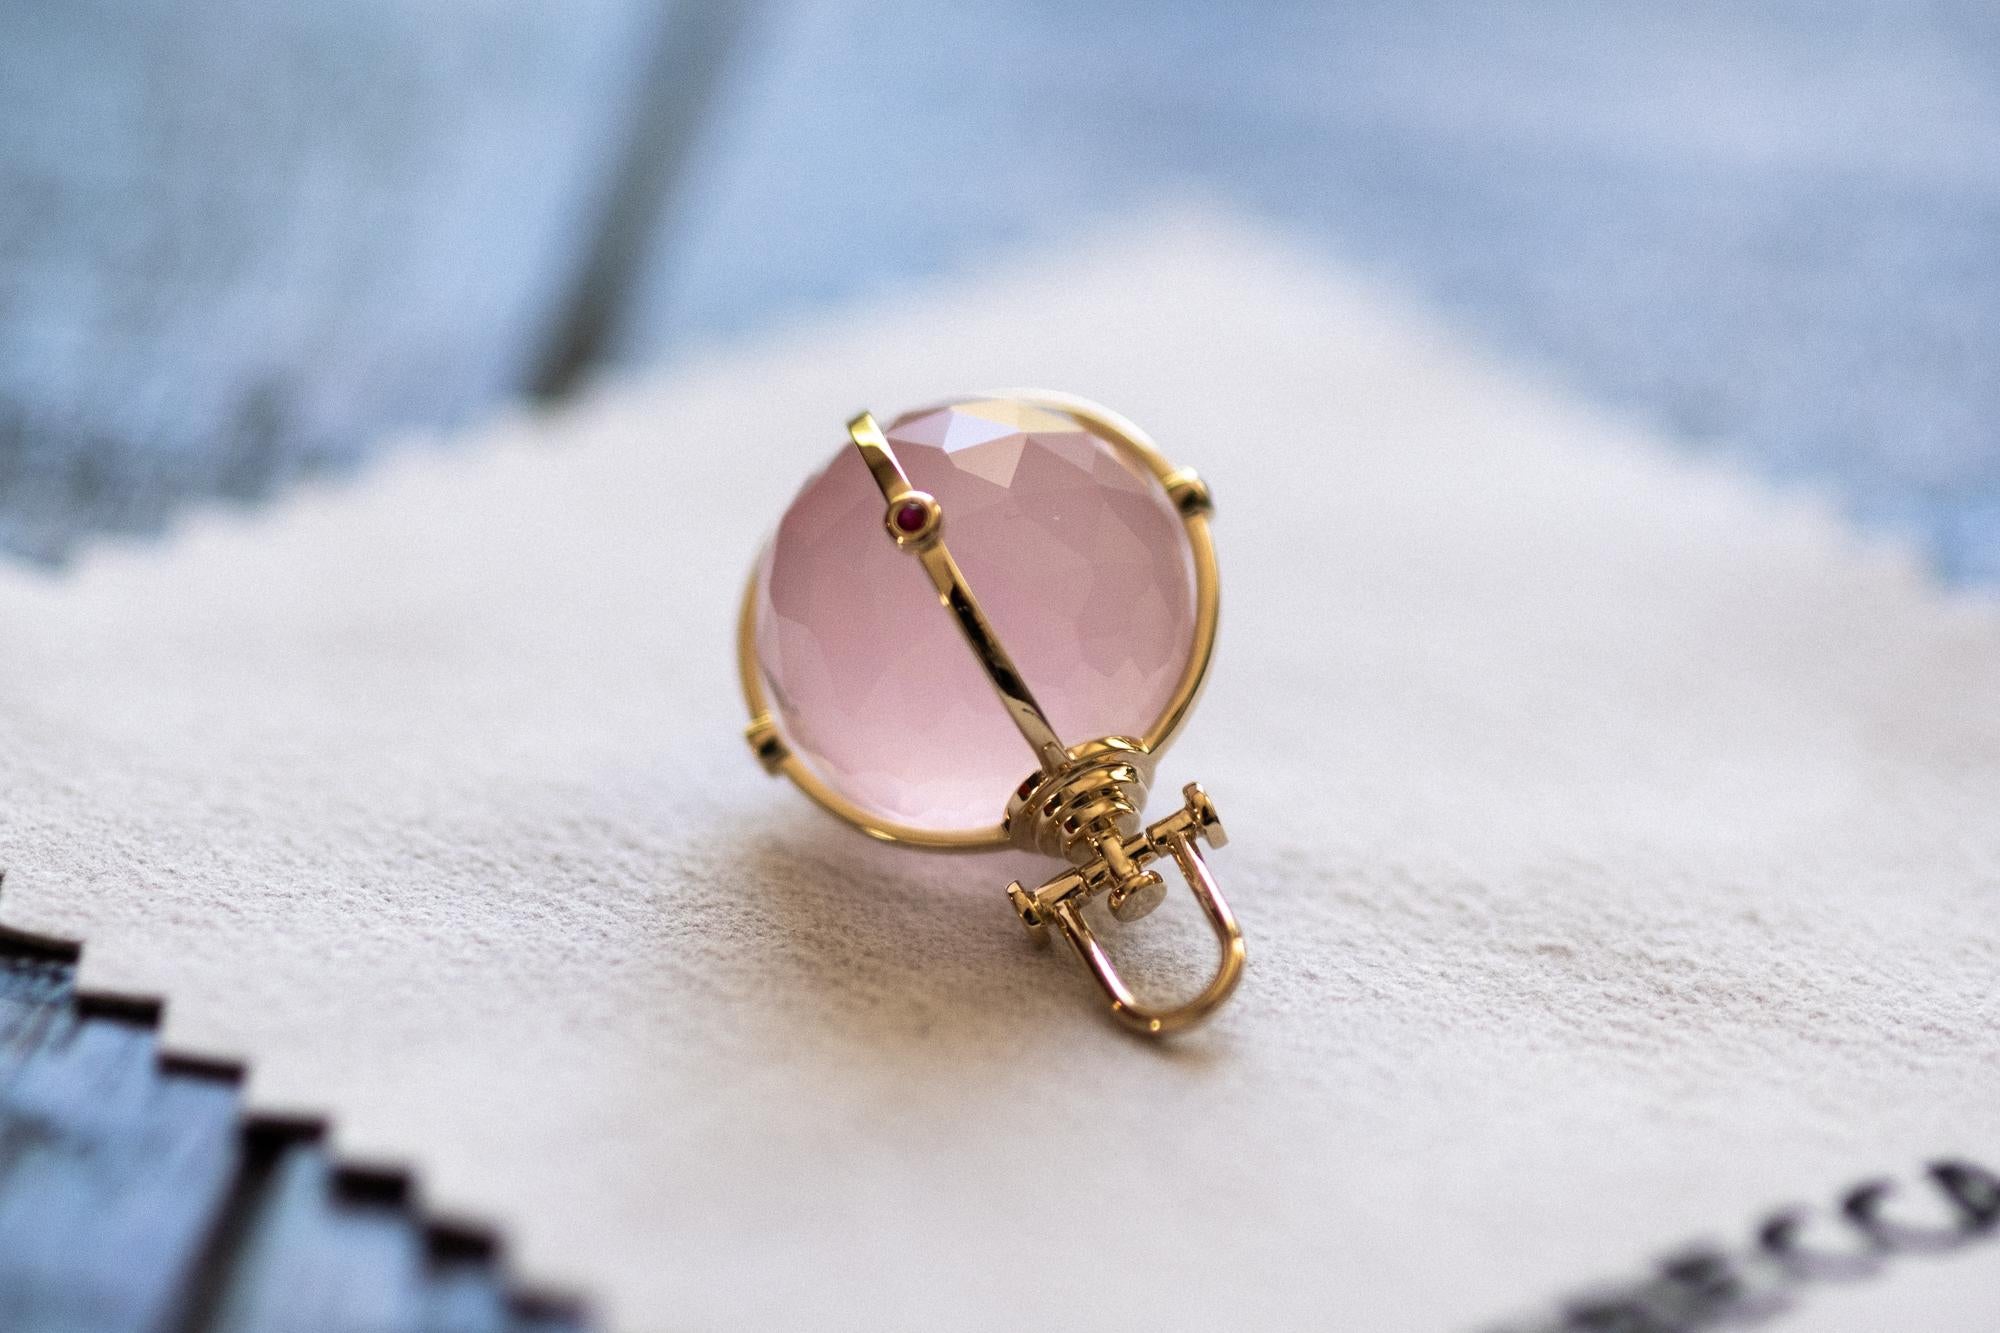 Talisman Pendant :
18K Yellow Gold
Main Gemstone: Faceted Rose Quartz
Accent Gemstone: Ruby
Pendant Size: 19 mm W * 19 mm D * 20 mm H
Gemstone Size:  16 mm W * 16 mm D * 16 mm H
Each piece is handcrafted by master artisan, infused with love.